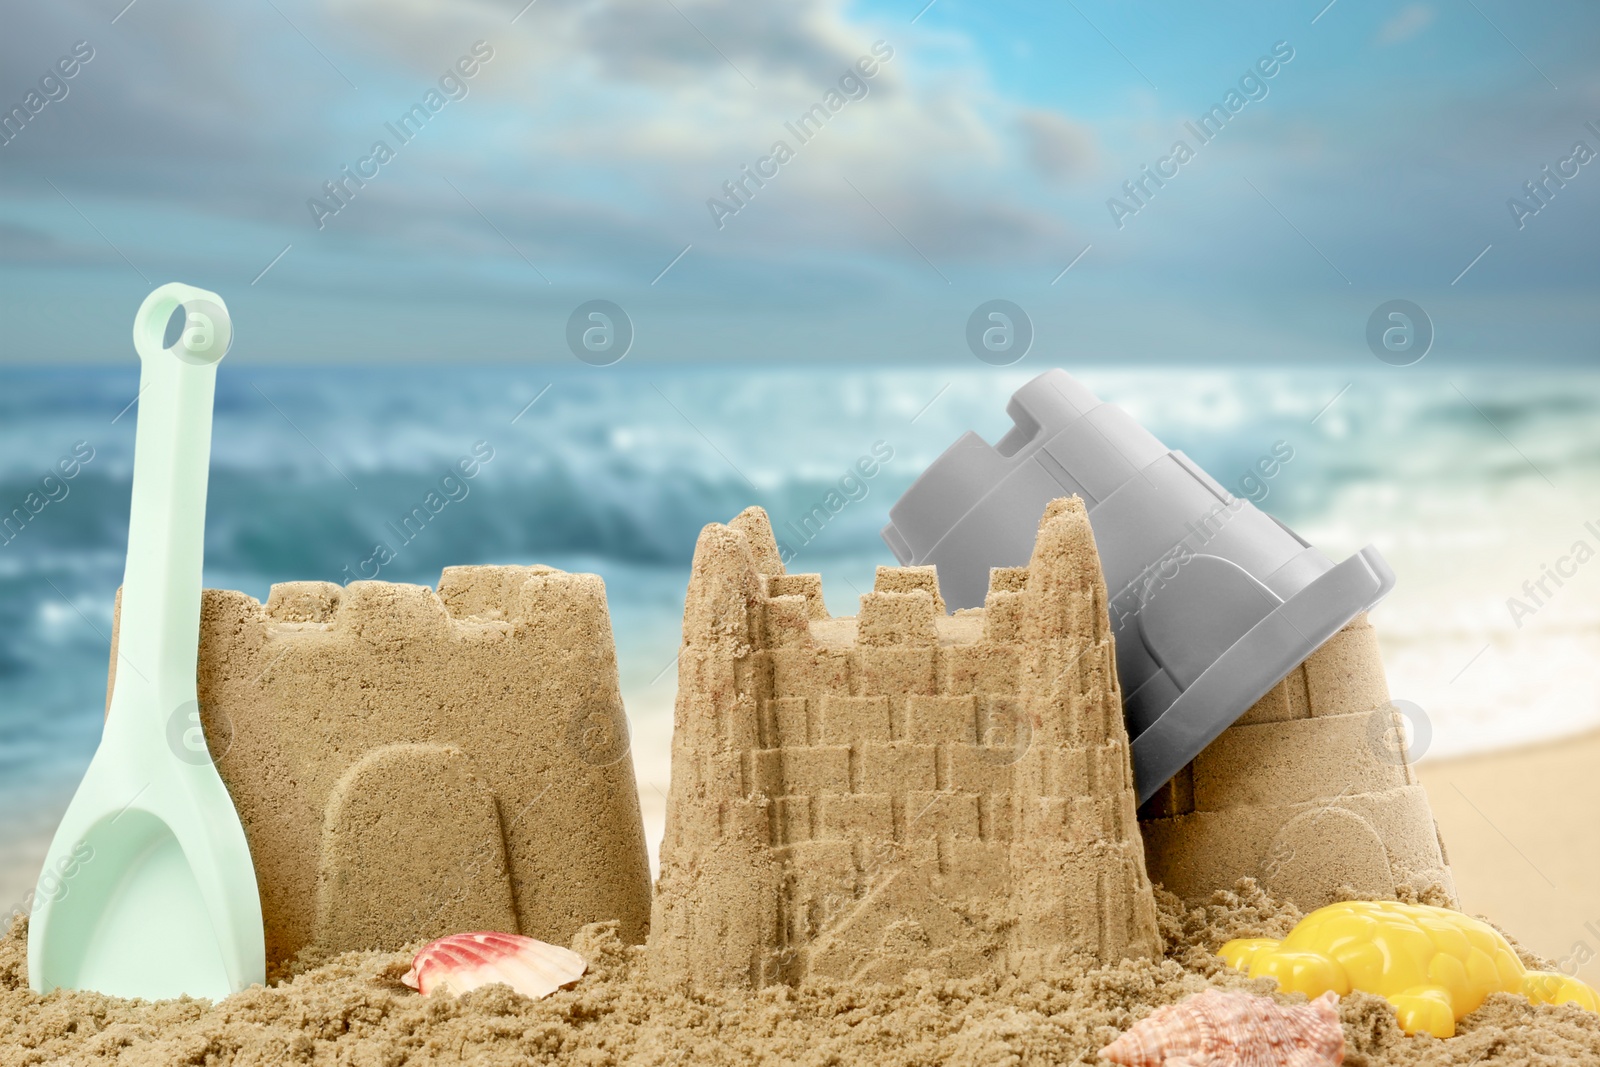 Image of Sand castles with toys on ocean beach, closeup. Outdoor play